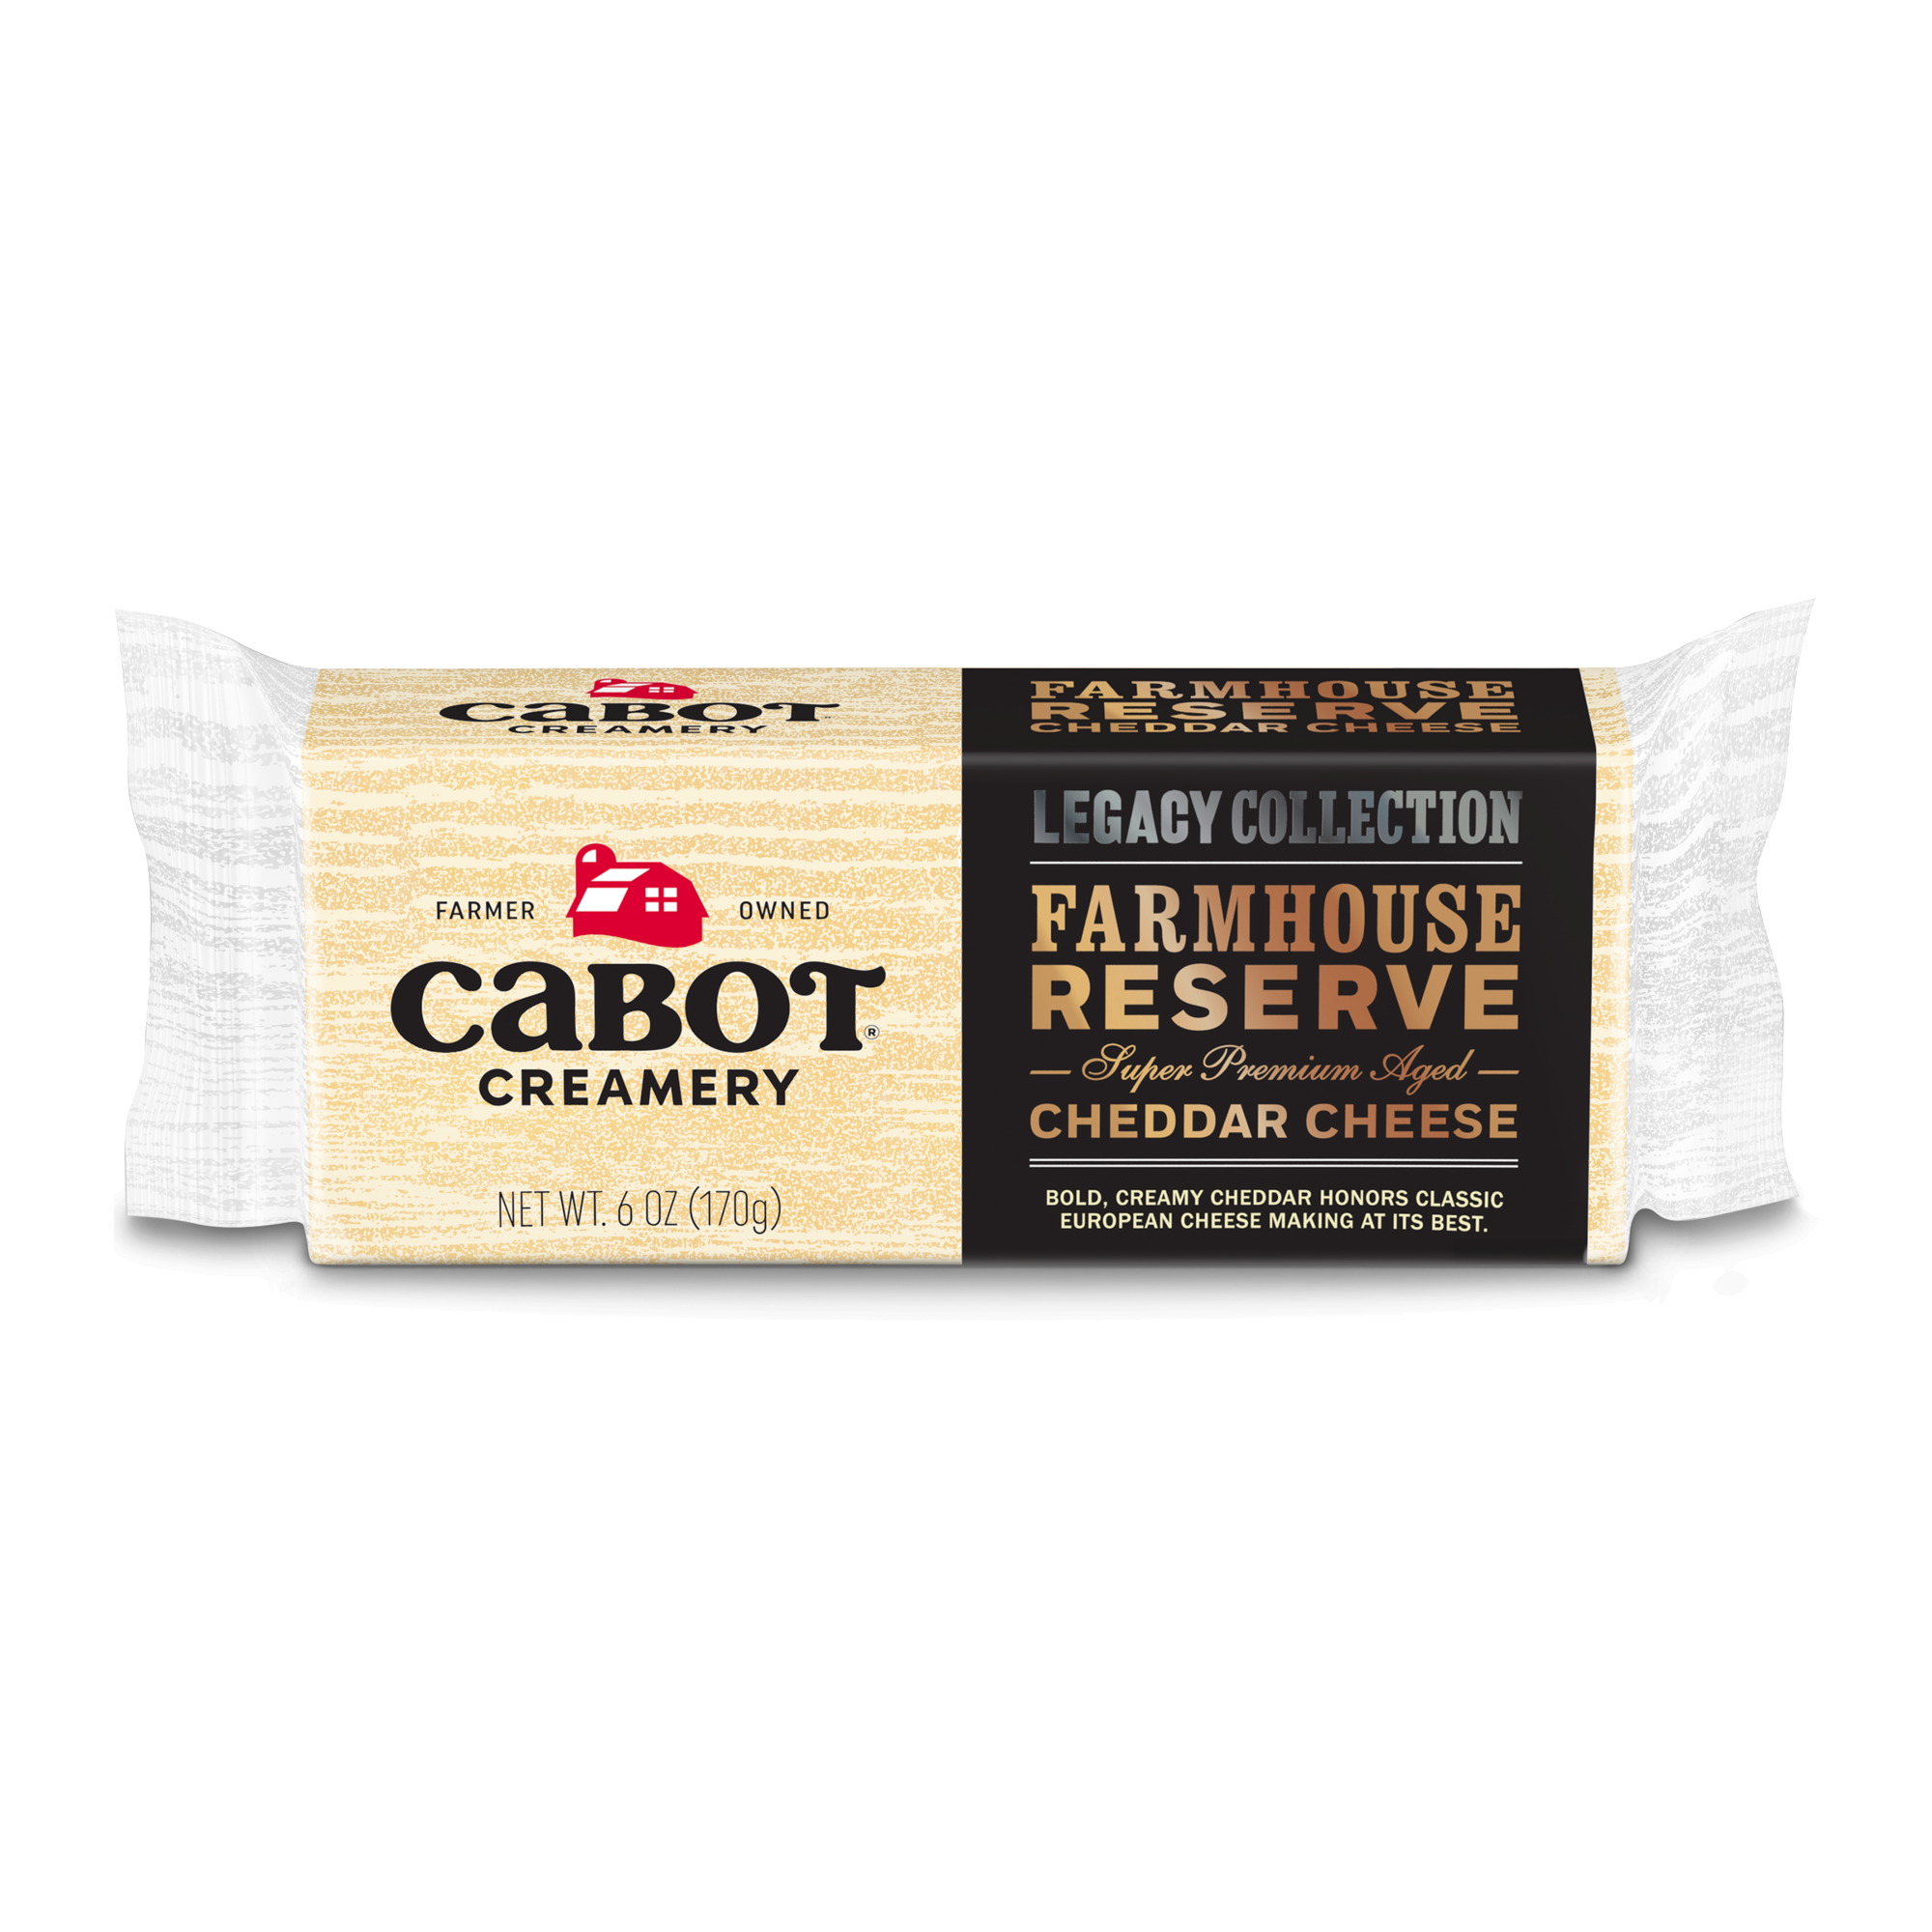 Cabot Farmhouse Reserve Cheddar Cheese 6oz 12ct